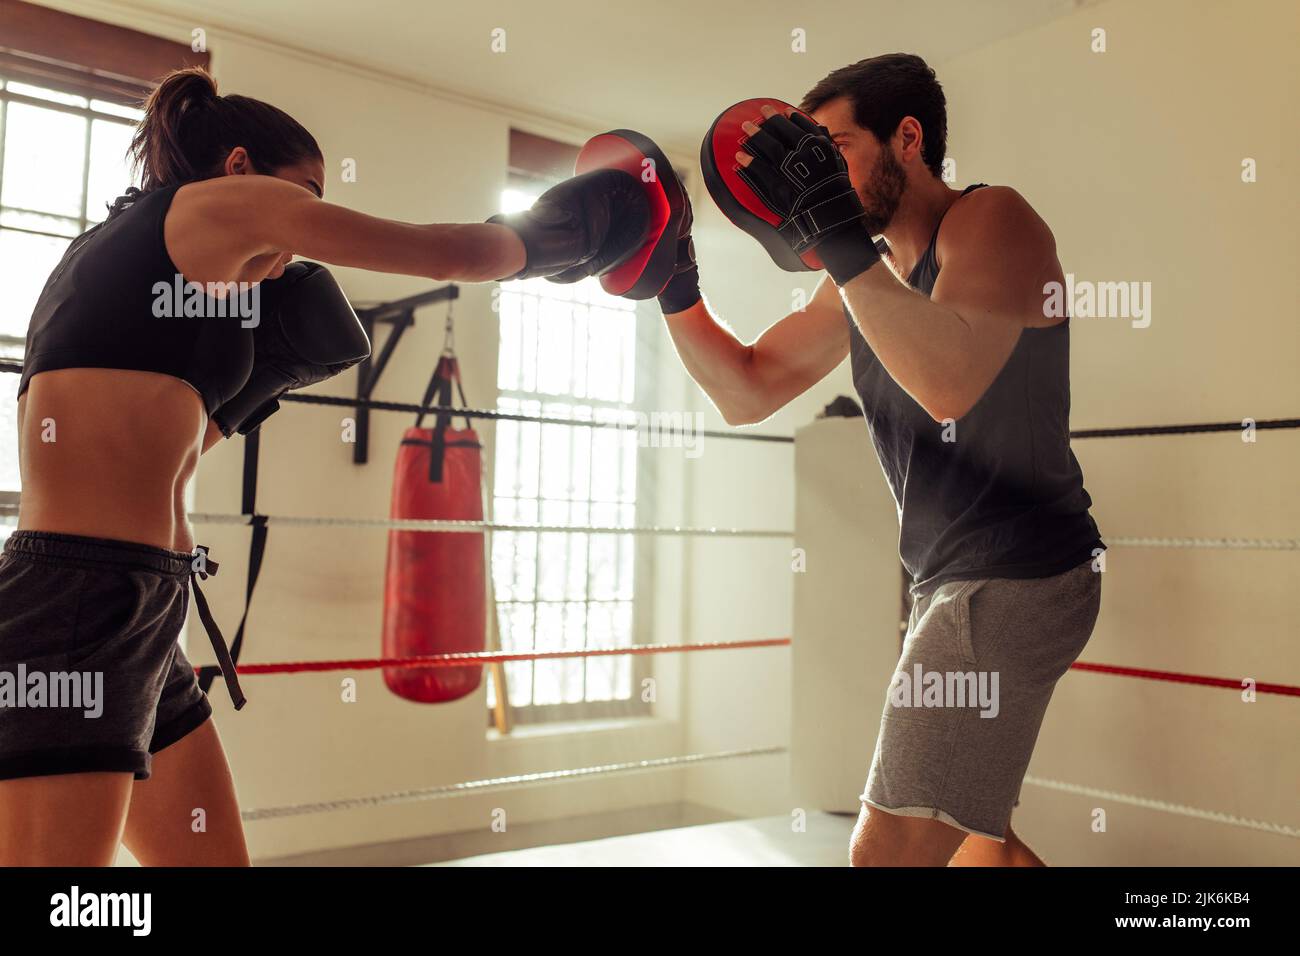 Woman in black shorts throws punch with gloved hands as her instructor holds focus pads in boxing ring Stock Photo